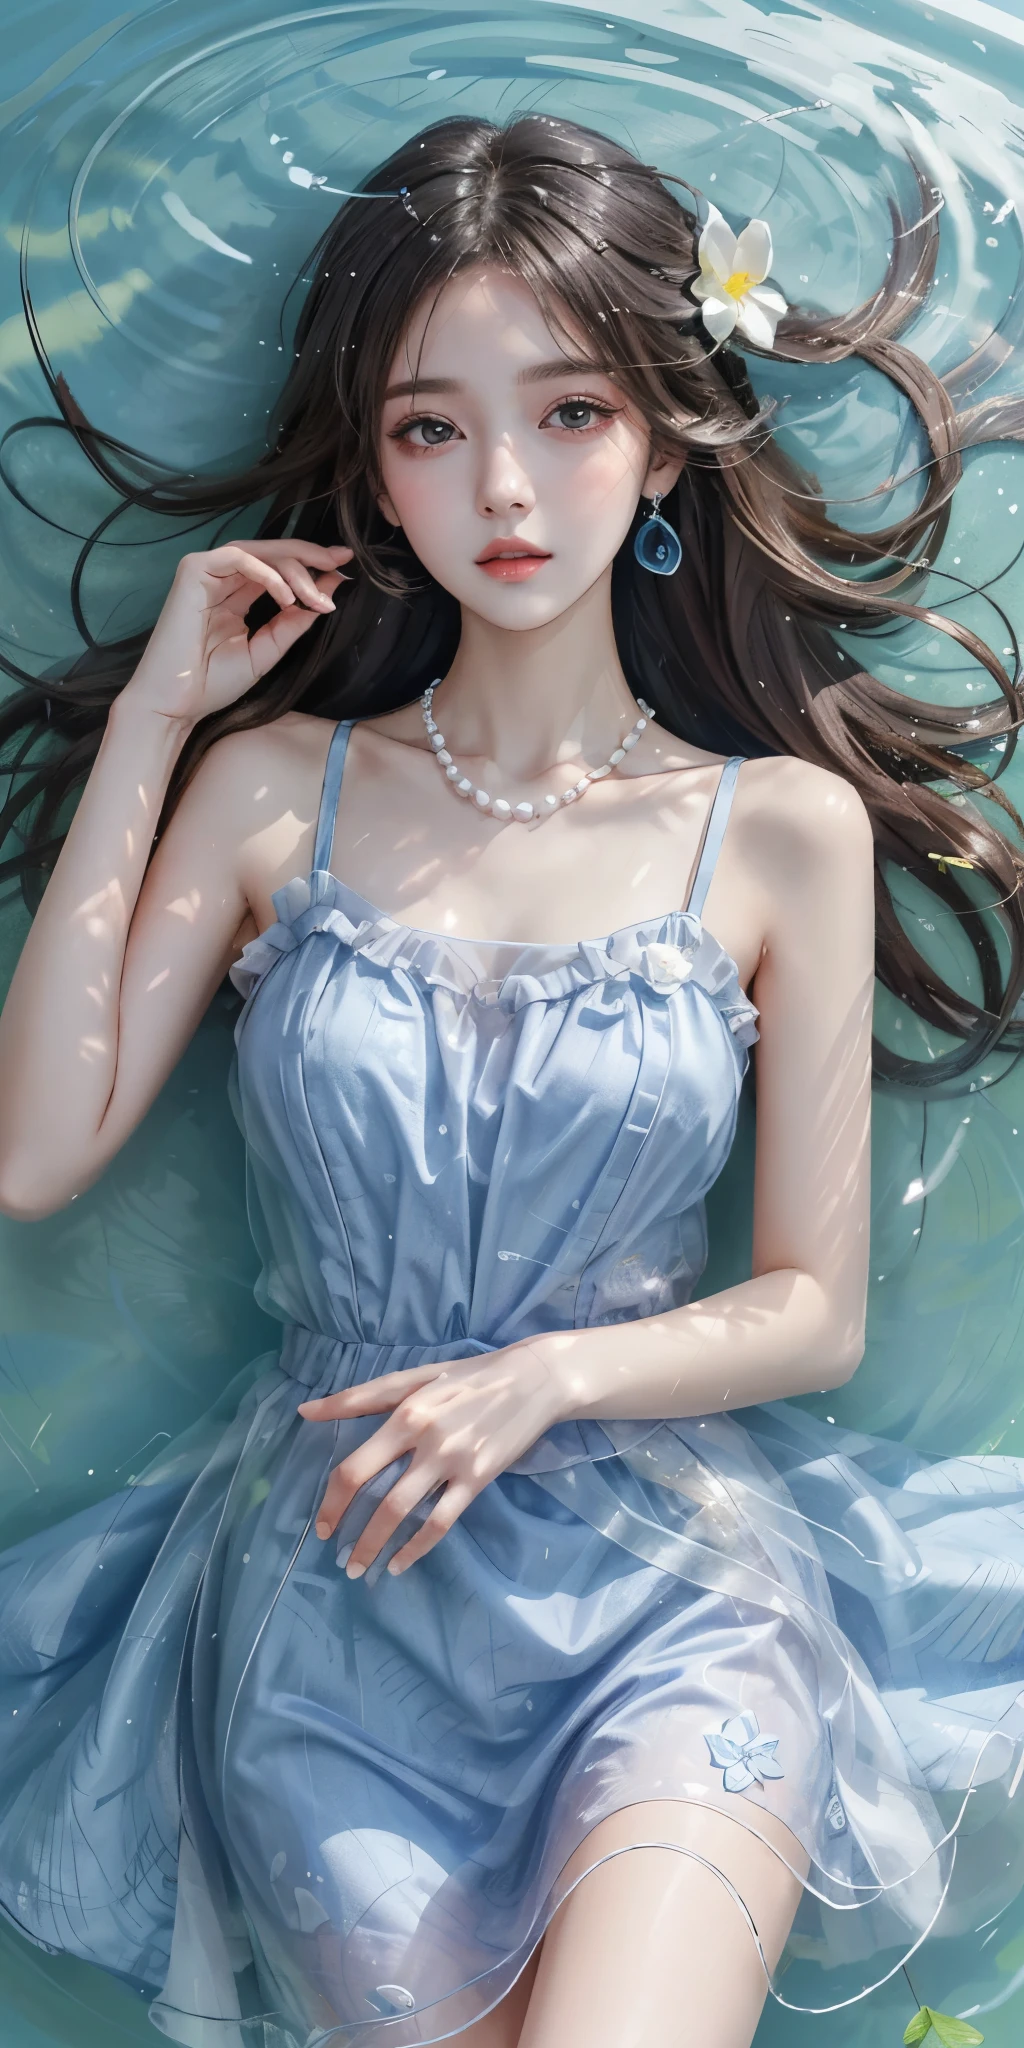 Sweet girl clothes2,pearl necklace,blue dress,flower,  best quality，masterpiece，ultra high resolution，Clear face,（Realism：1.4），RAW photos，cold light，woman wearing transparent dress underwater，Full body image，wallpaper anime blue water，Gurwitz-style artwork，Close-up fantasy of water magic，author：Yang Jie，Gurwitz，A beautiful artistic illustration，Water Nymphs，Beautiful digital artwork，Beautiful digital illustration，Li Song，A beautiful anime portrait，Bovo&#39;s art style